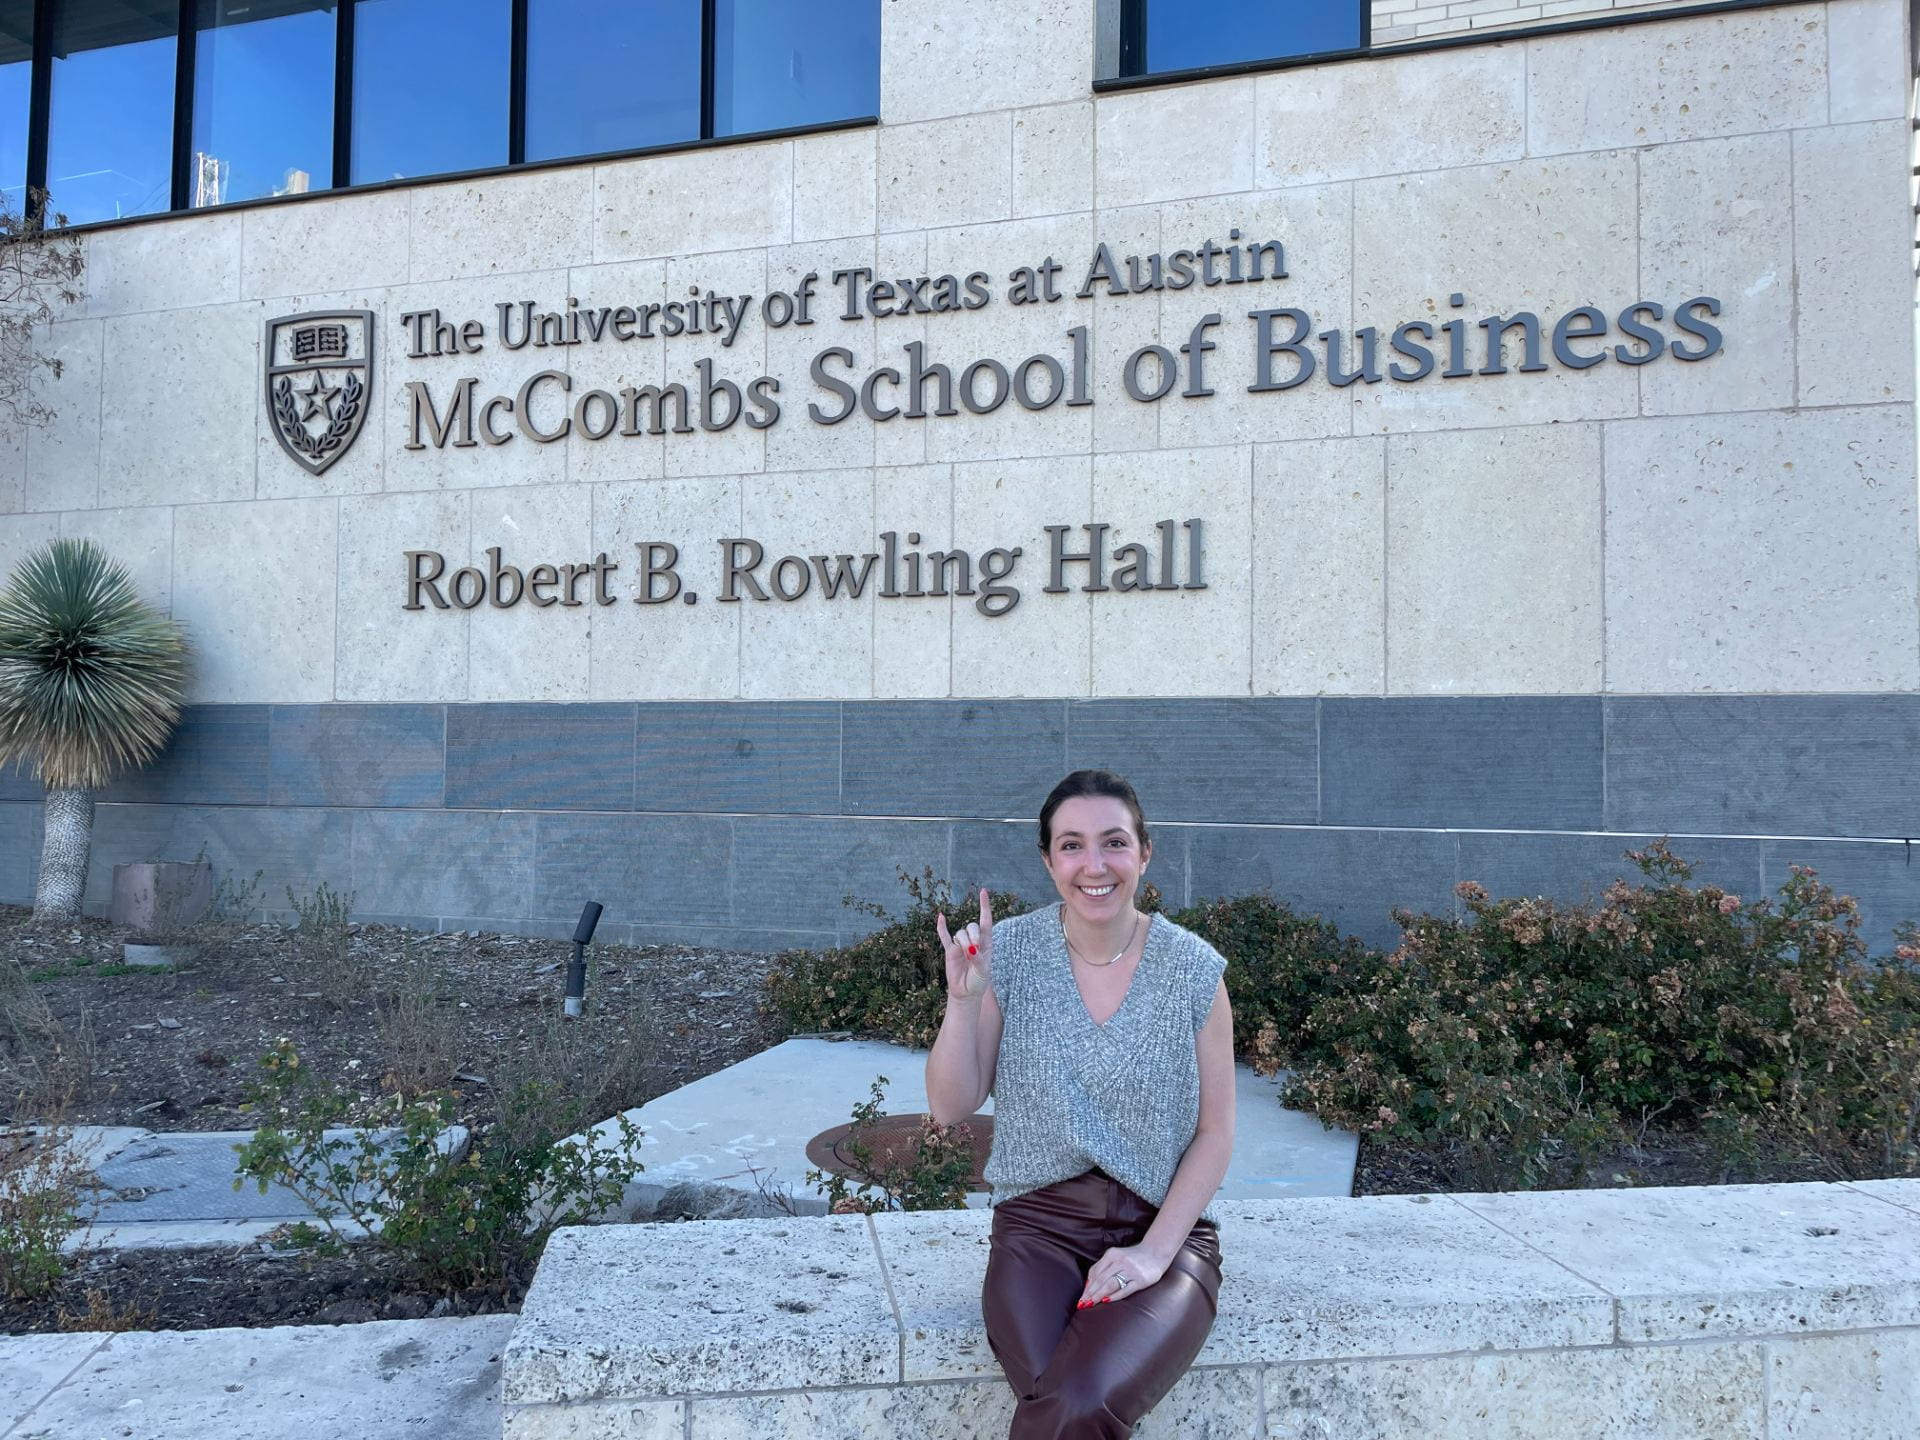 Marion sits outside of a Texas McCombs sign in thr front of our building. The sign reads "The University of Texas at Austin: McCombs School of Business - Robert B. Rowling Hall"